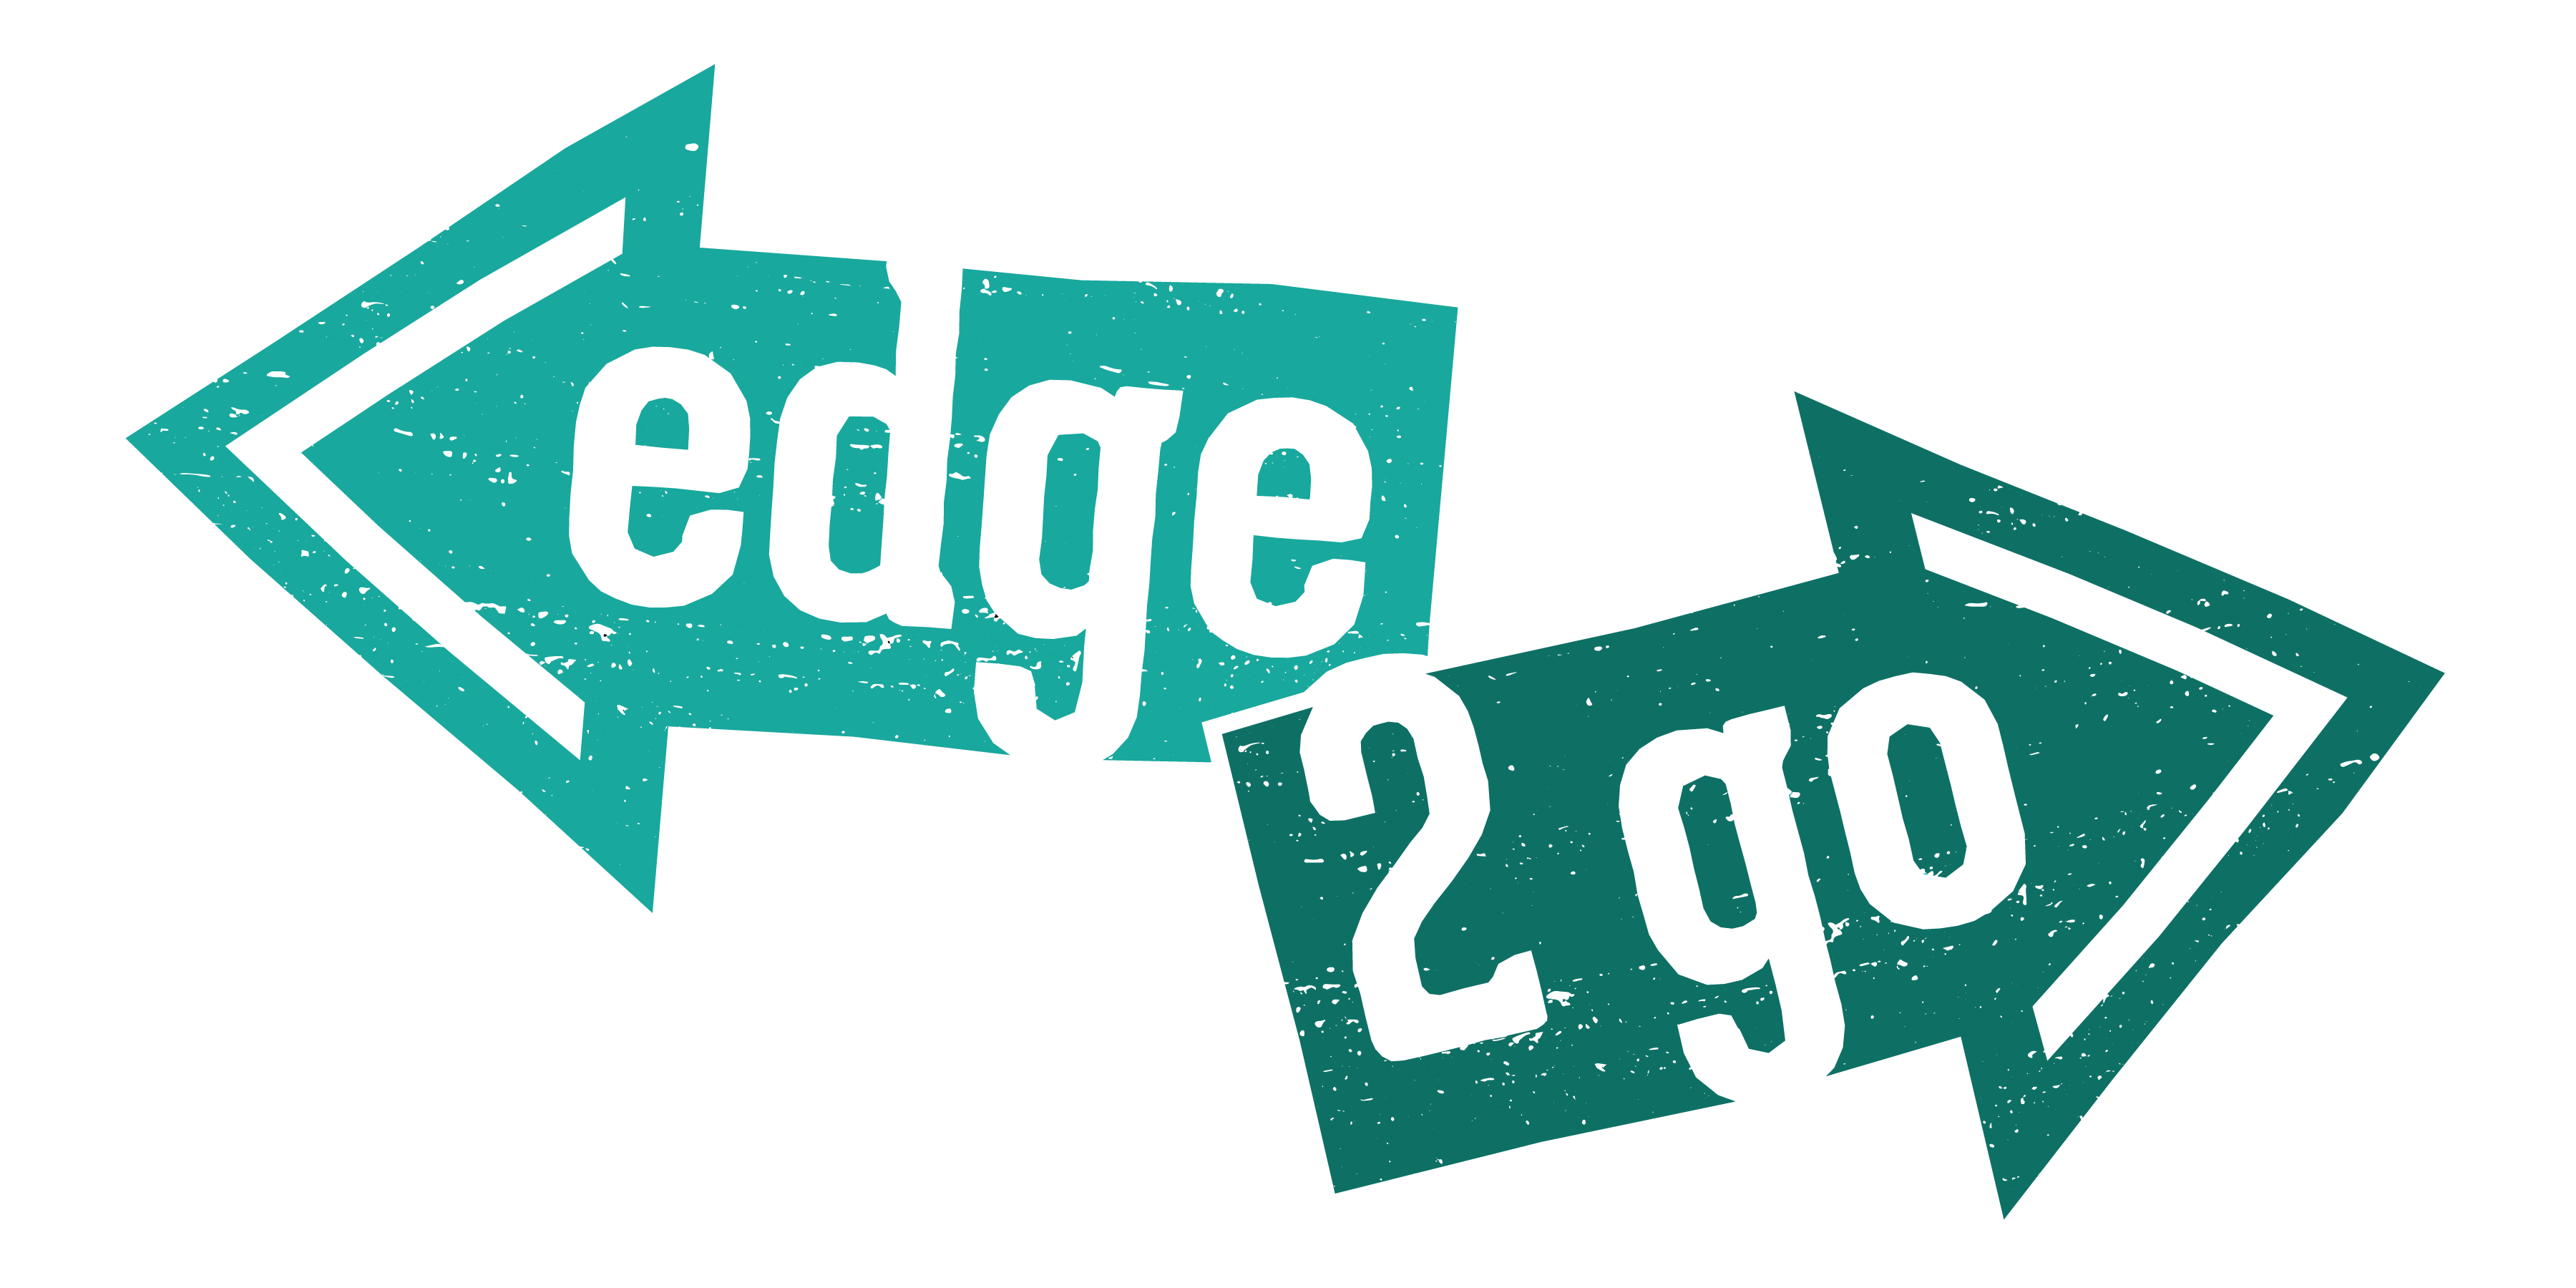 A black background with the words edge 2 go written in green.